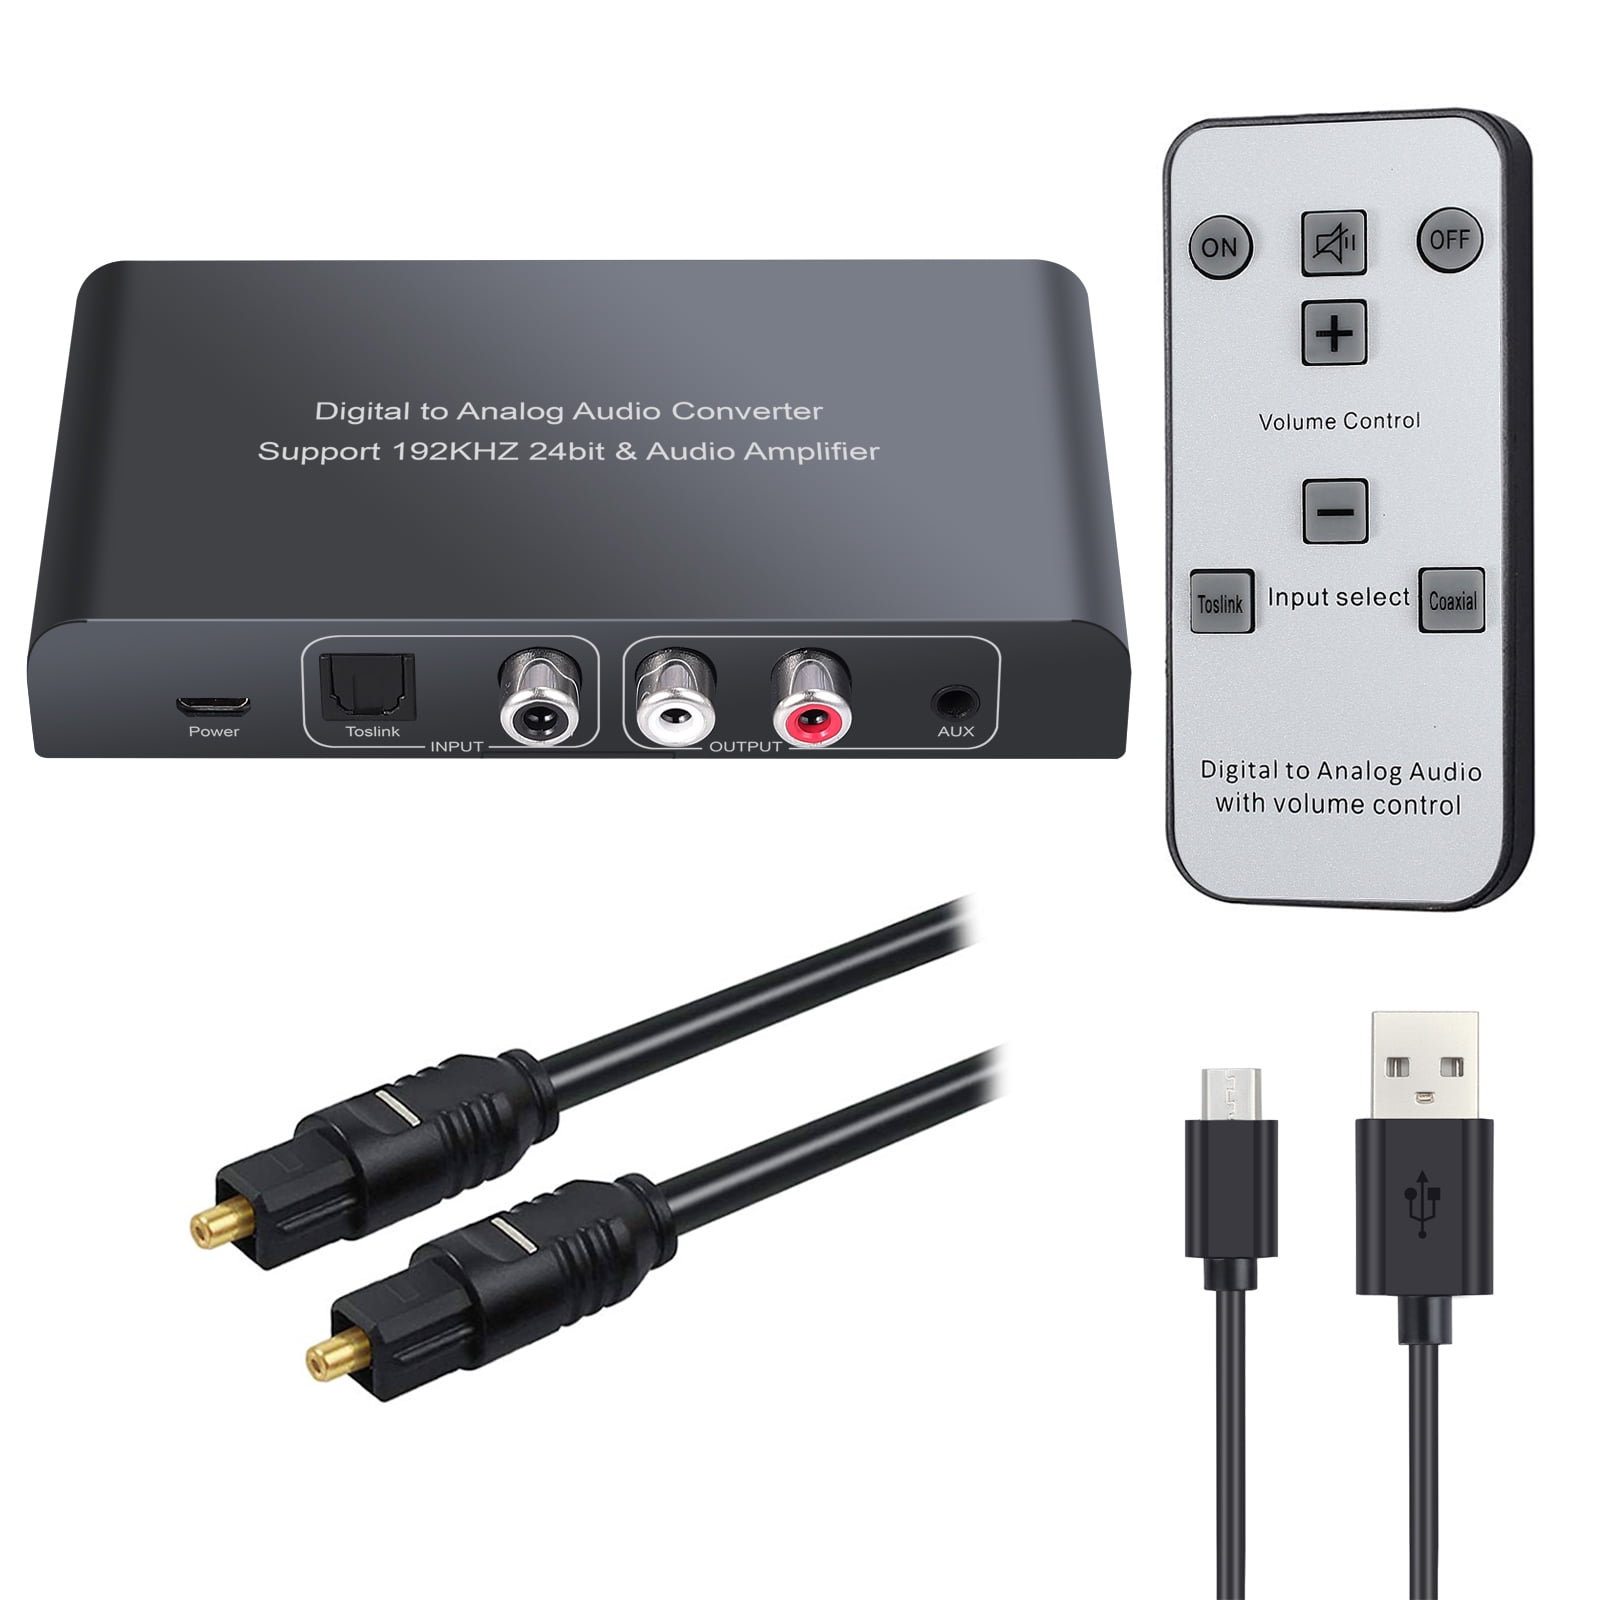 Volume support. Digital to Analog Audio DAC Converter Adapter Digital SPDIF Optical Toslink to 3.5 aux. Digital to Analog Audio DAC Converter Adapter. Digital-to-Analog Converter (DAC). Analog Audio out Cable dv15.